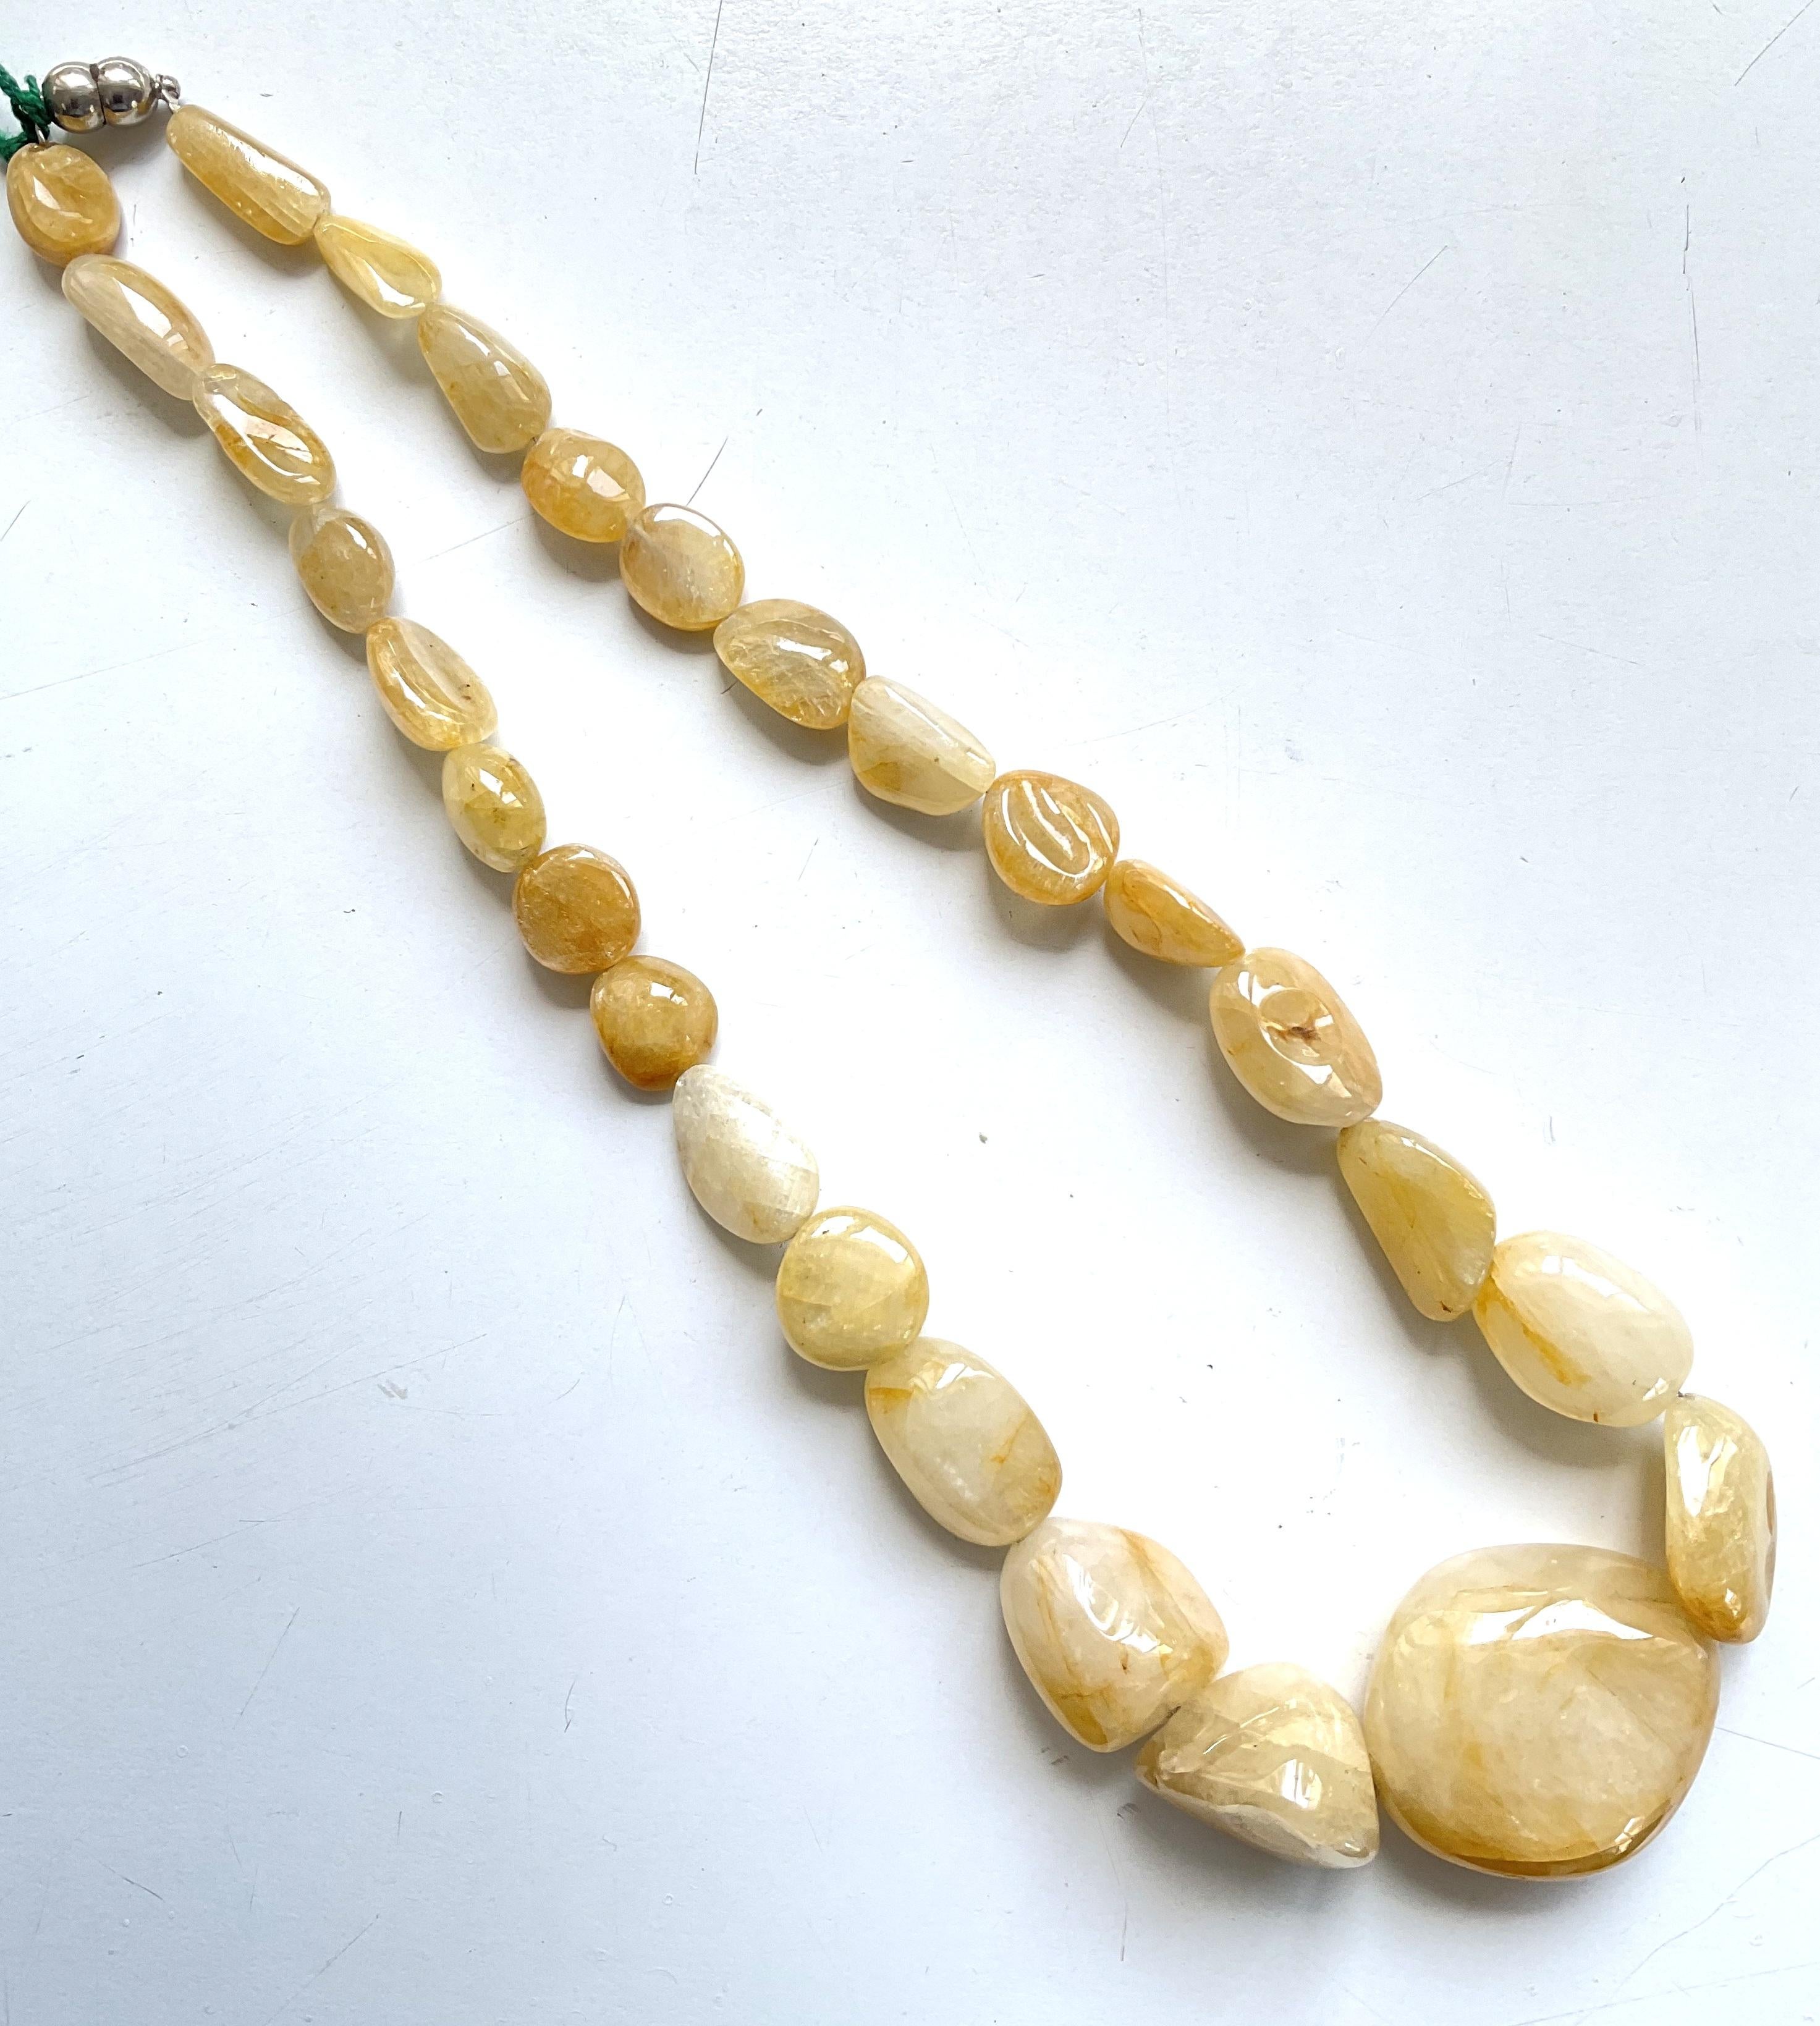 1111.20 Carats Big Size Yellow Sapphire Plain Tumbled Natural Gemstone Necklace

Gemstone - Sapphire
Weight -  1111.20 carats 
Shape - Tumbled
Size - 12x14 To 42x35 MM
Quantity - 1 line
